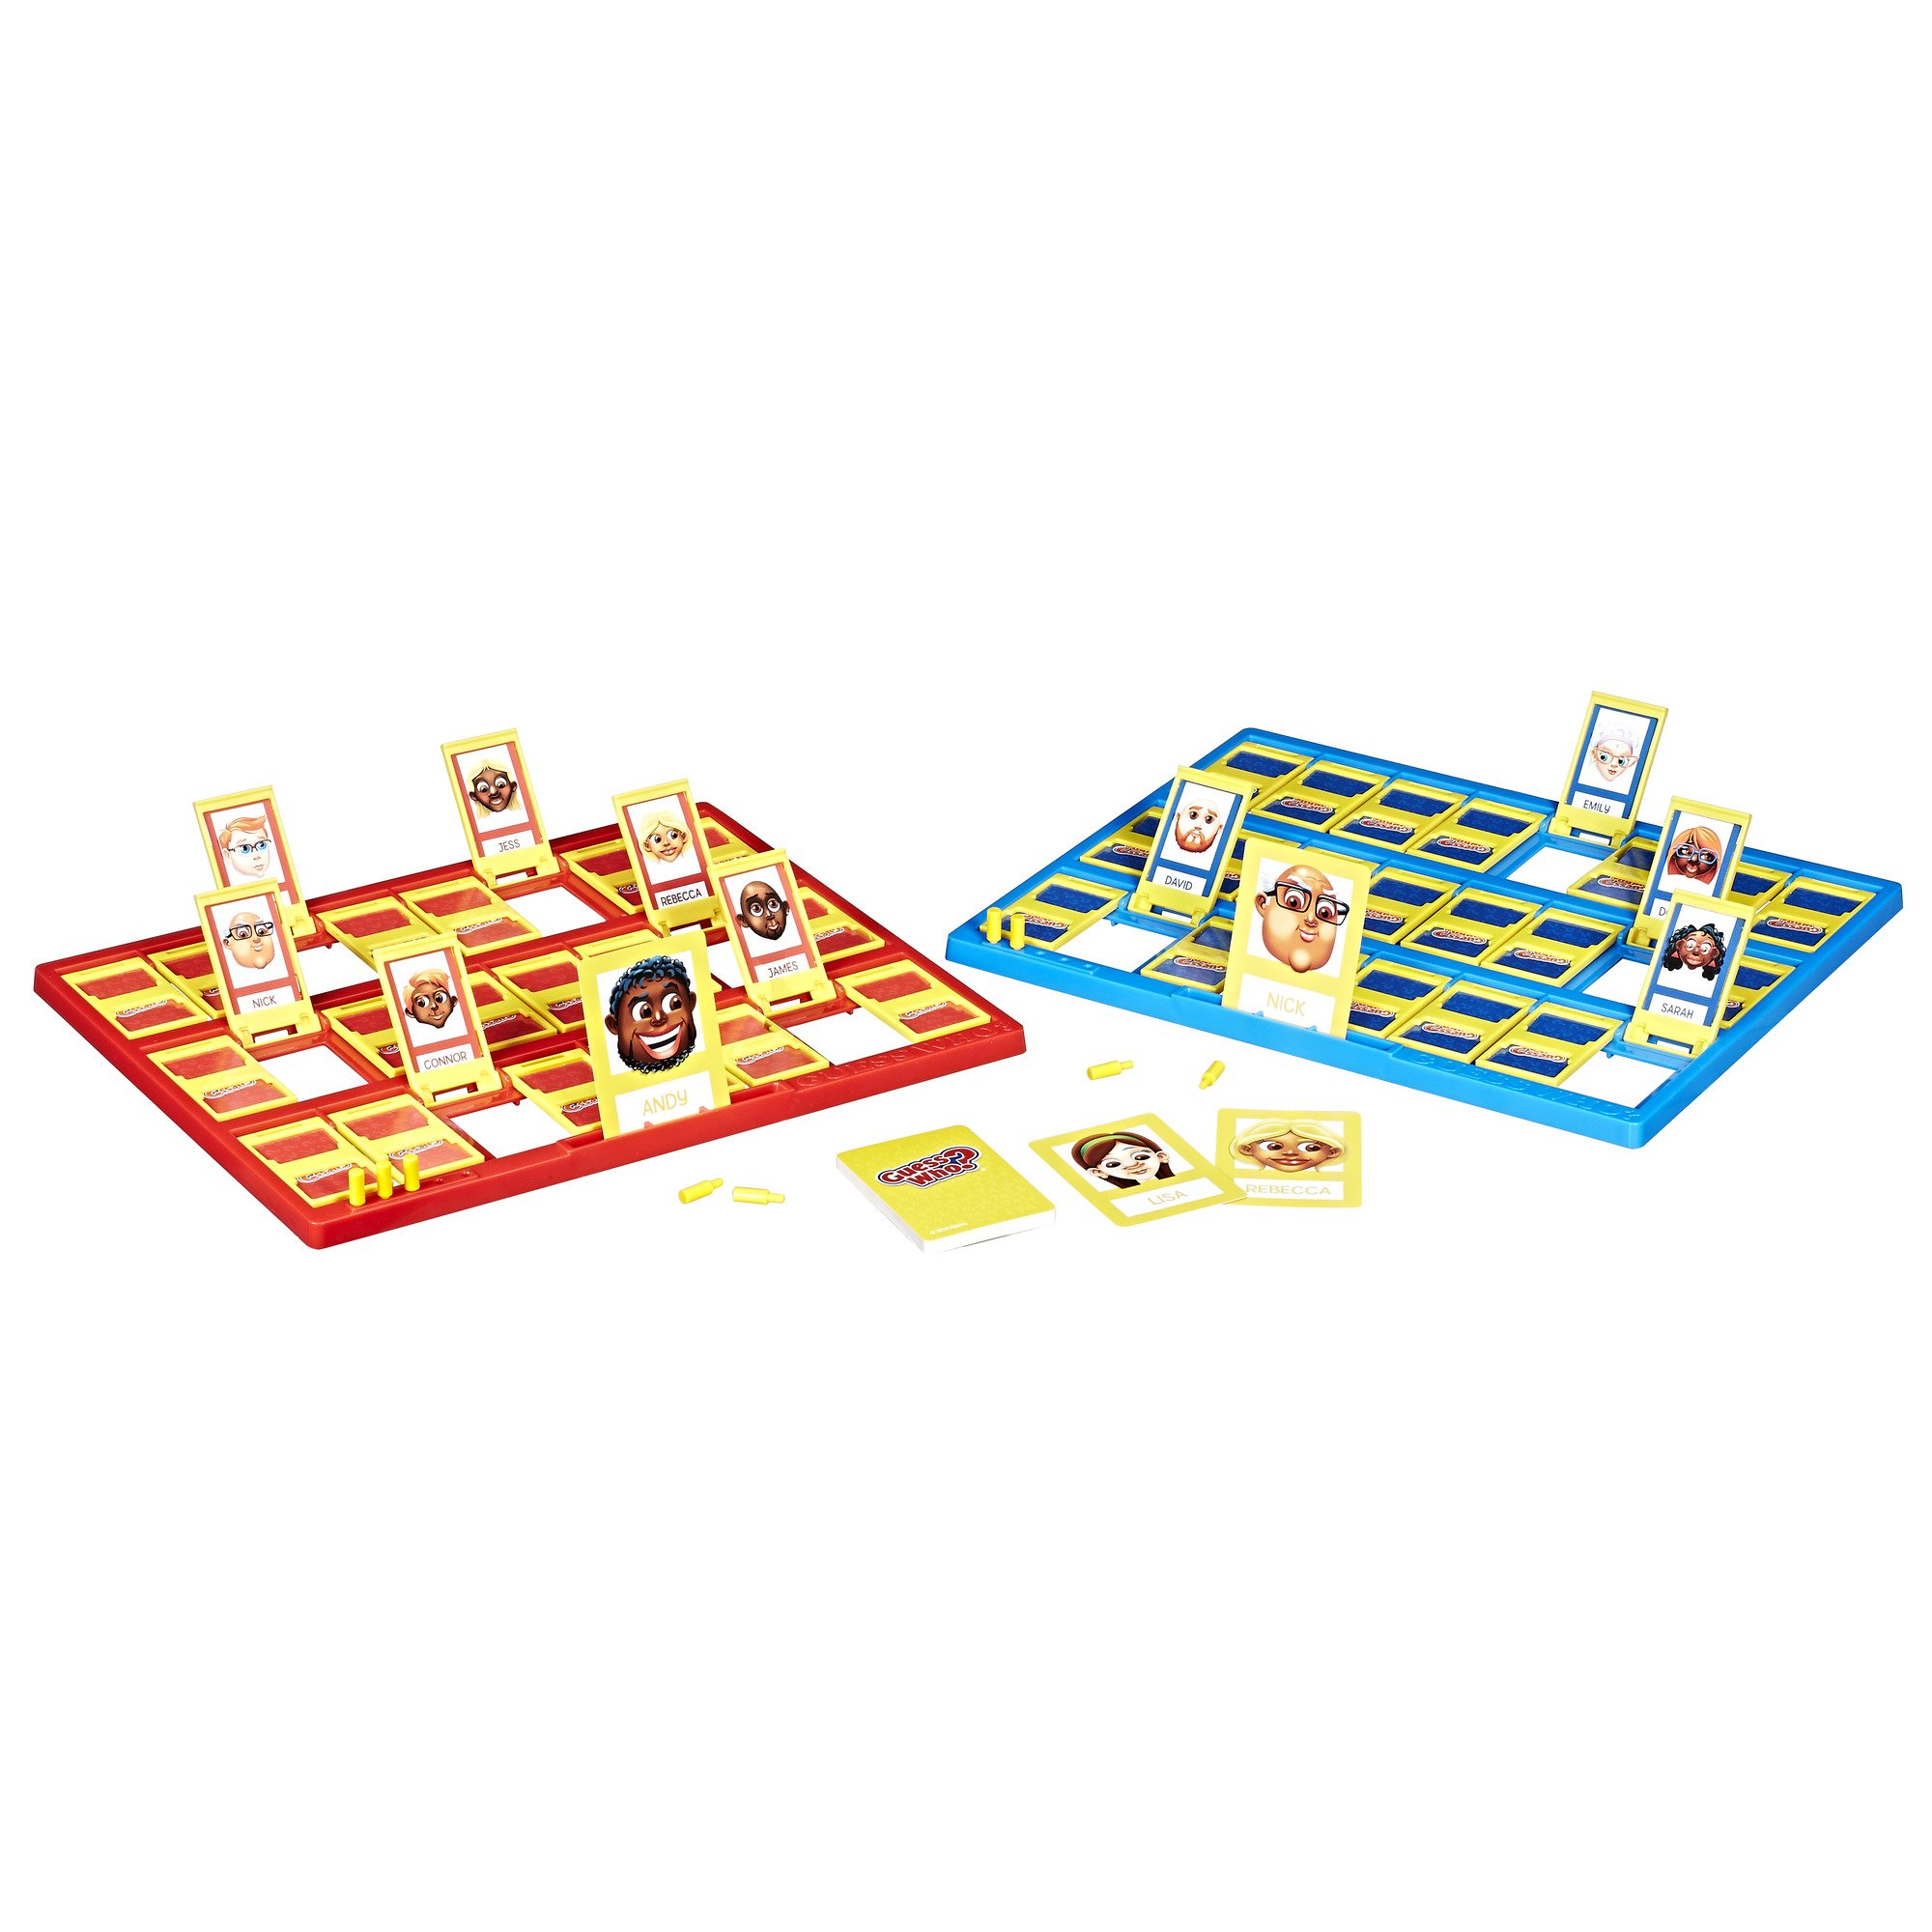 Hasbro Gaming Guess Who? Original Guessing Game For Kids Ages 6 & Up for 2 Players